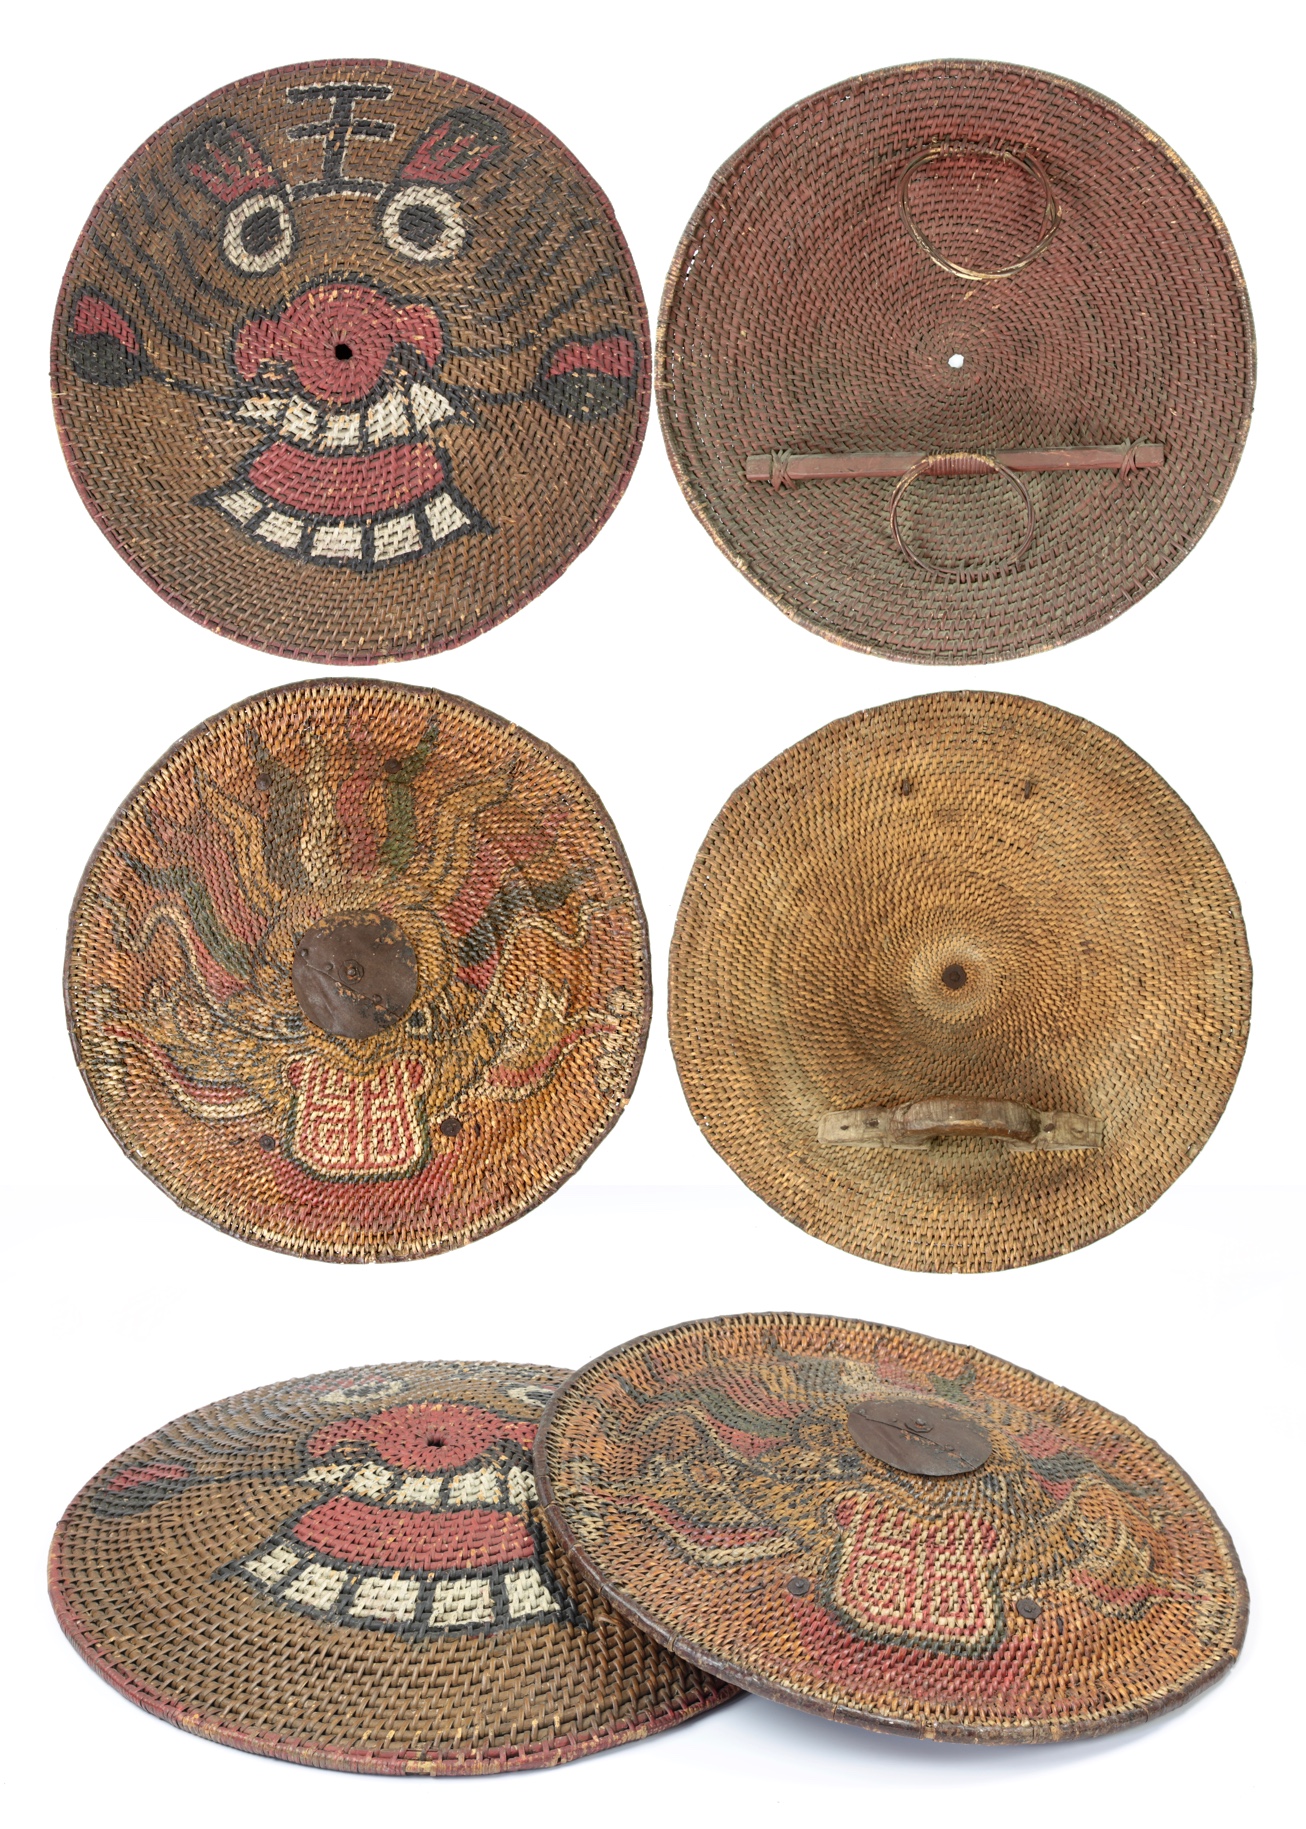 A comparison between Chinese and Vietnamese rattan shields